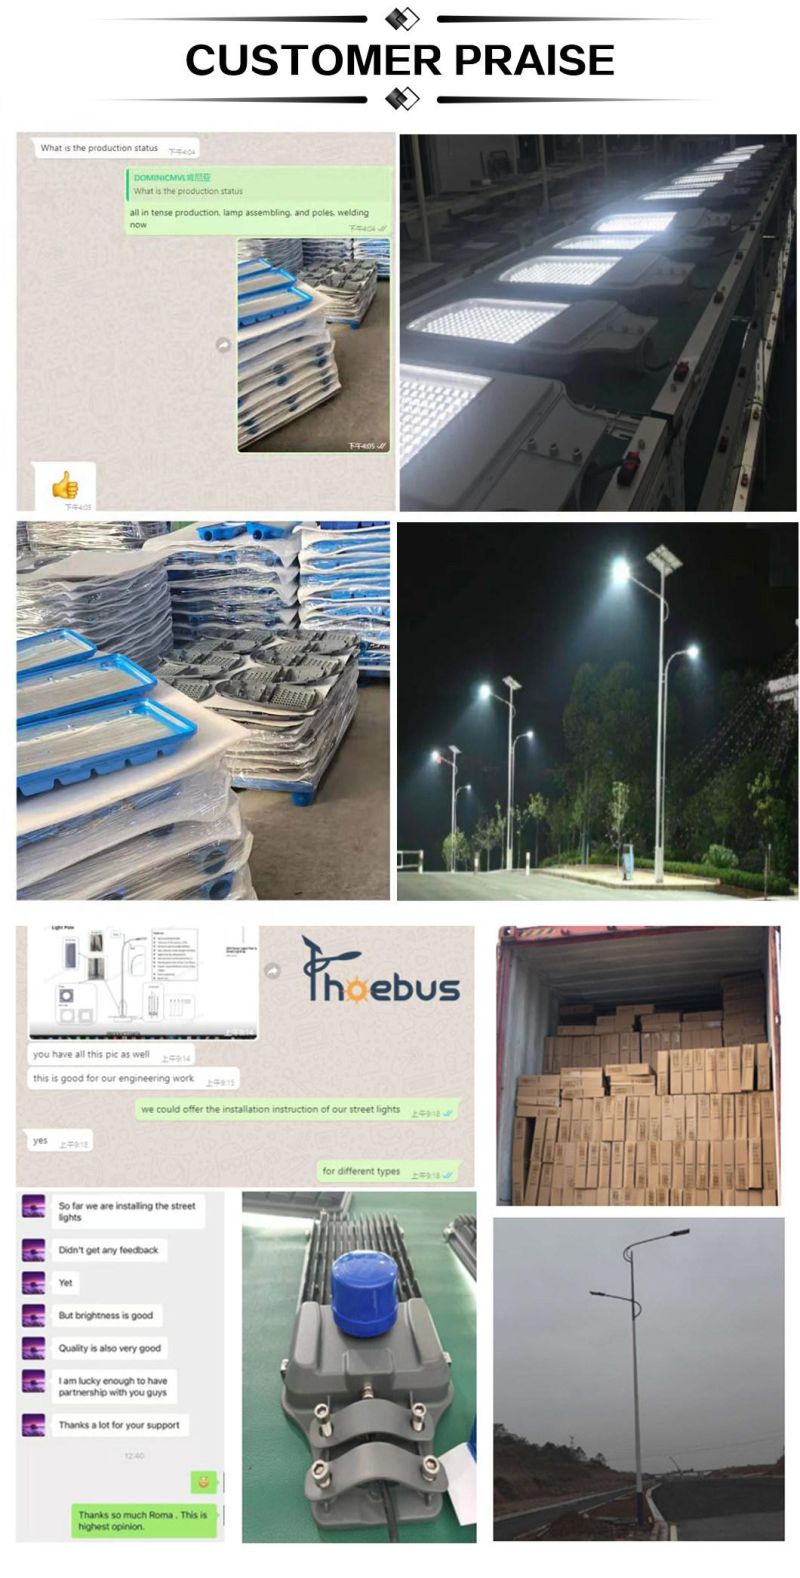 AC 100W 120W 200W Outdoor LED Street Light High Bright 3030 Chip LED Lamp